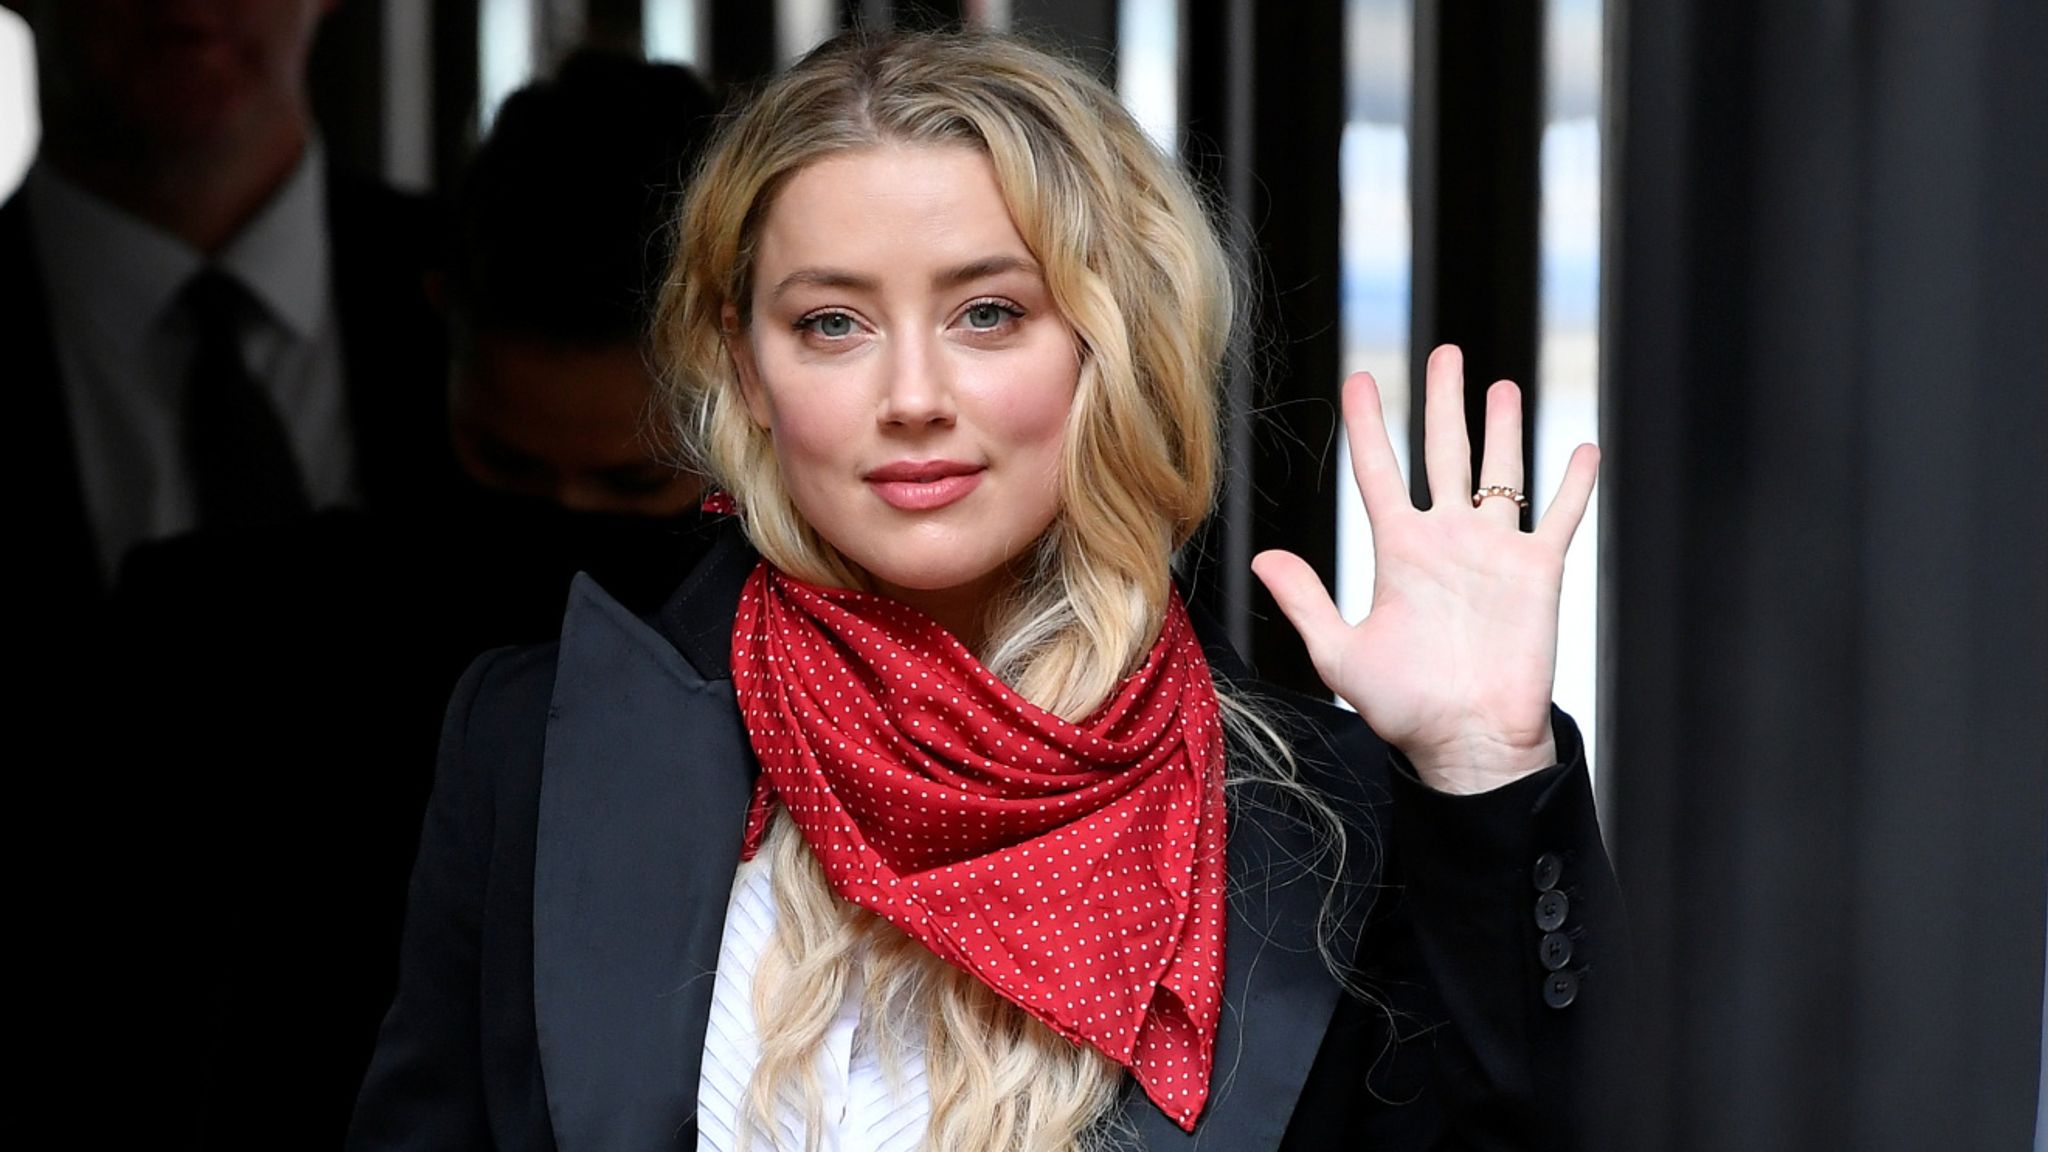 Actor Amber Heard waves as she arrives at the High Court in London, Britain July 14, 2020. REUTERS/Toby Melville